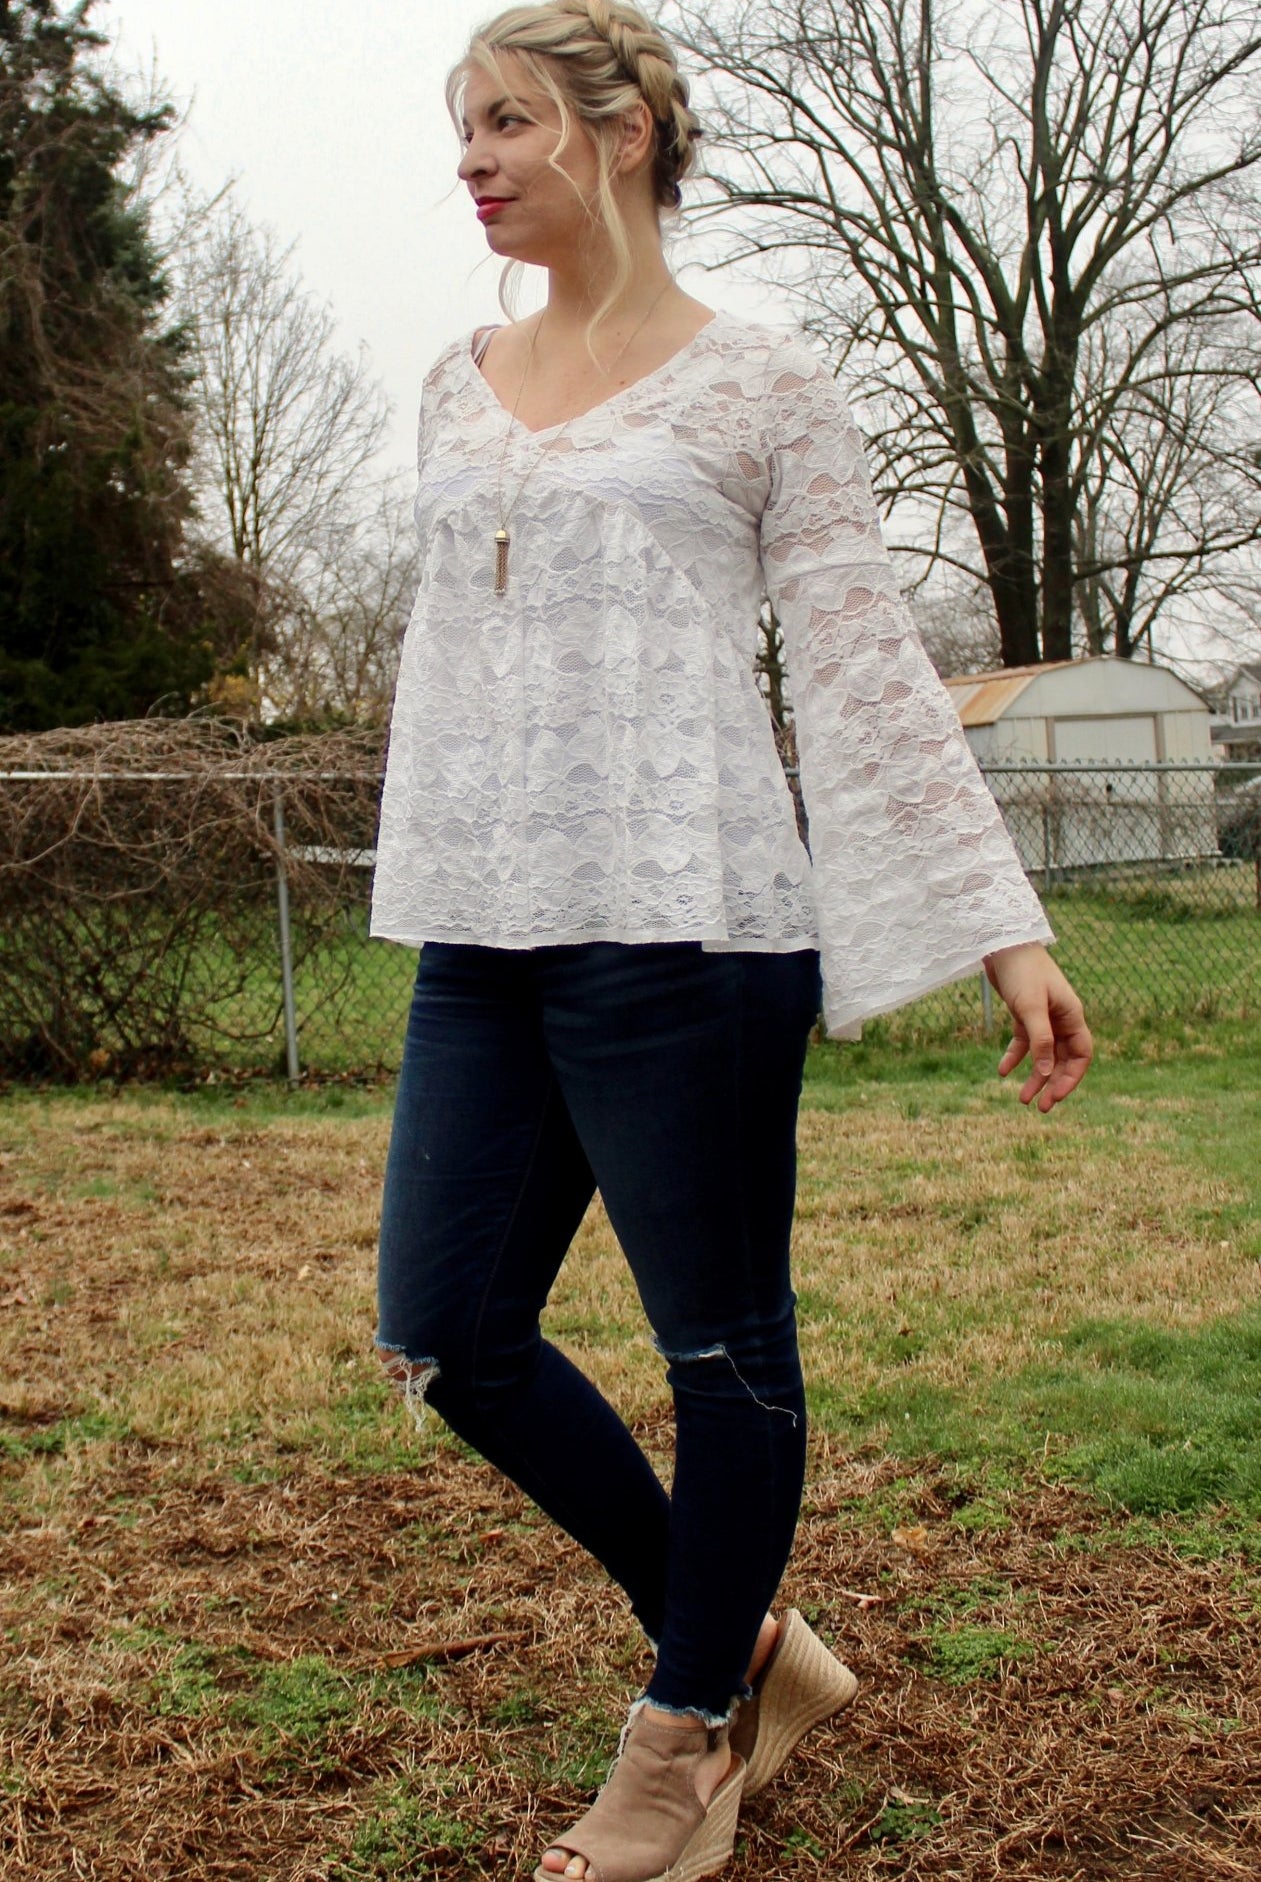 Delicate Leaves and Floral Stripes in White. Stretch Lace Knit. SL-113 - Boho Fabrics